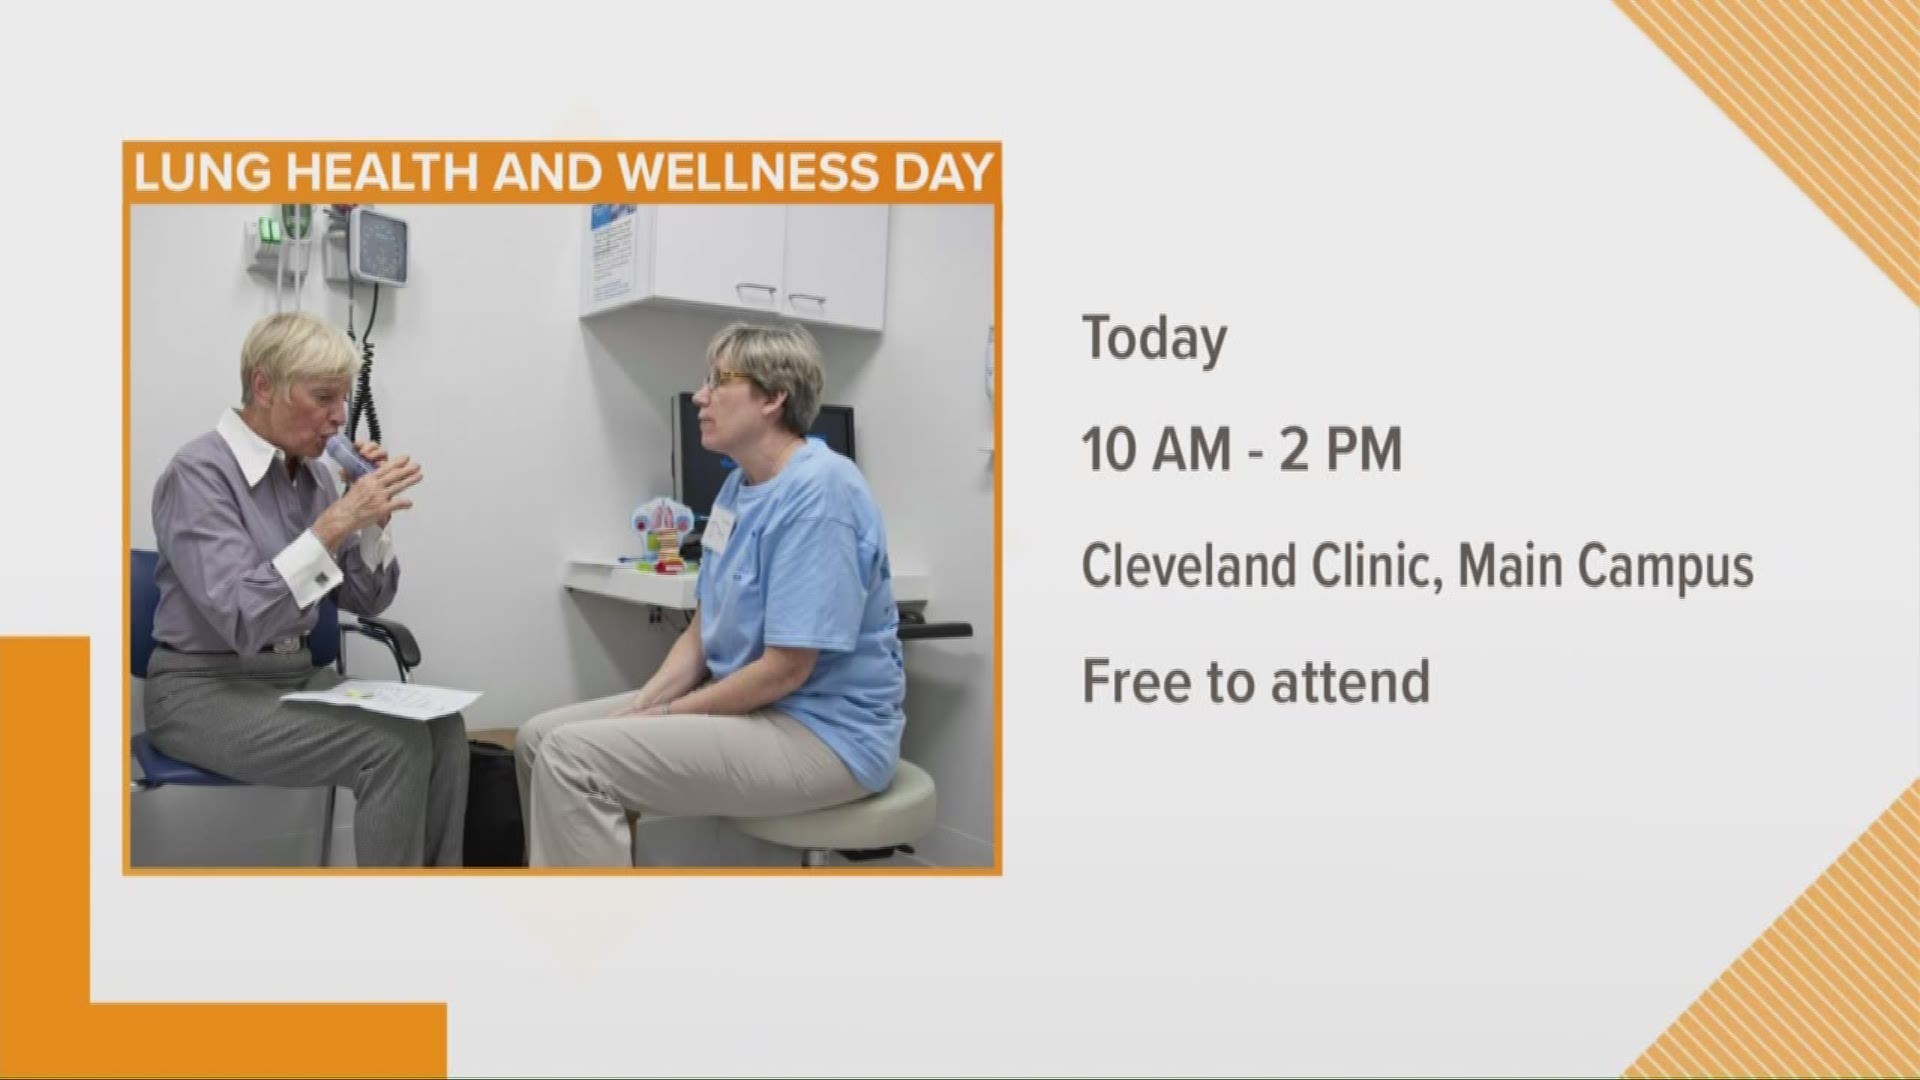 CLE Clinic Lung Health Wellness Day